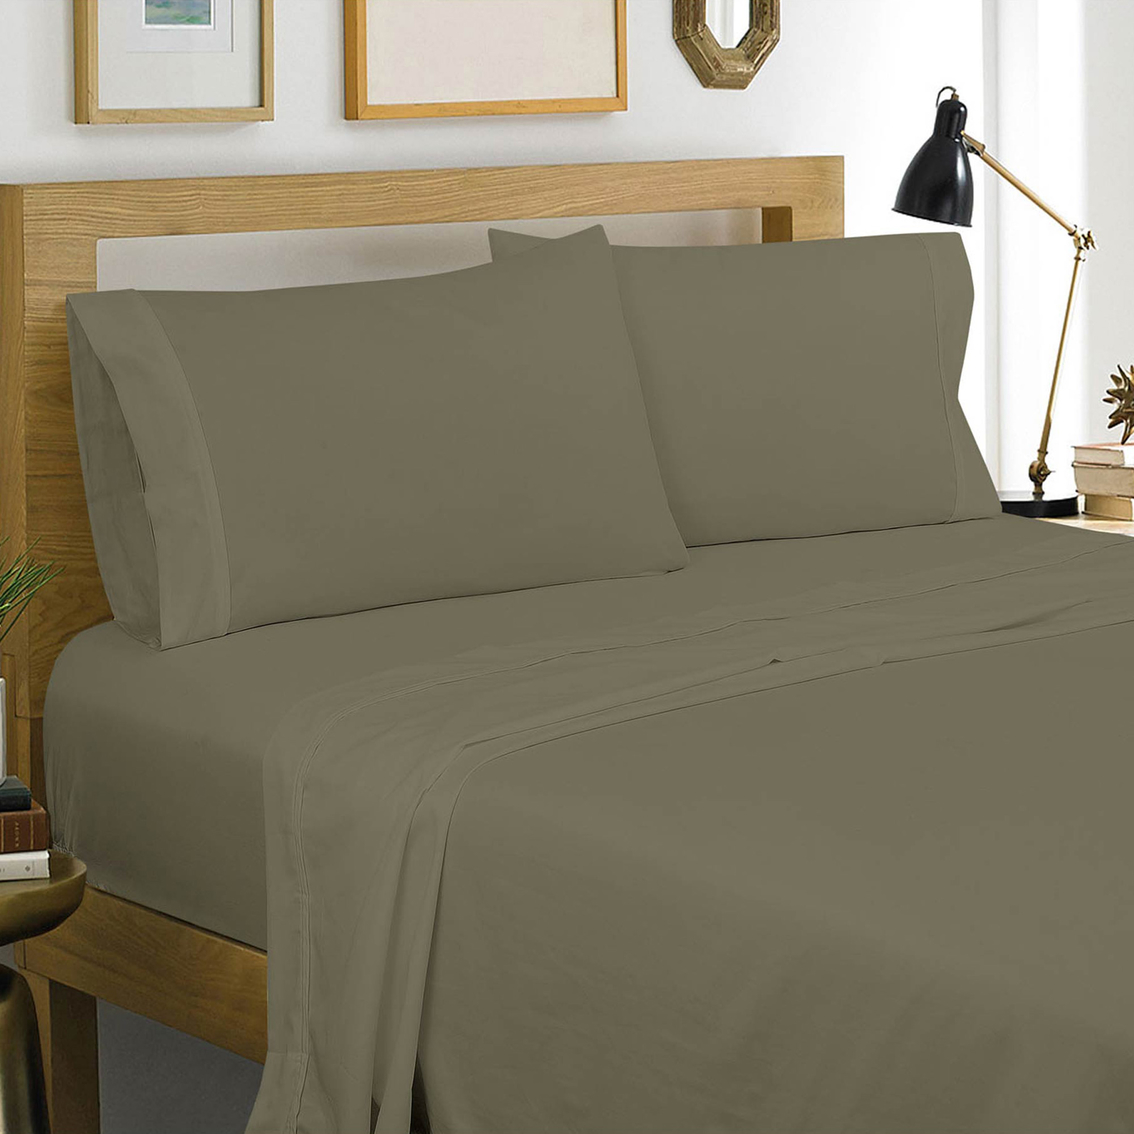 Royale Linens 400 Thread Count Performance Sheet Set - Image 4 of 4